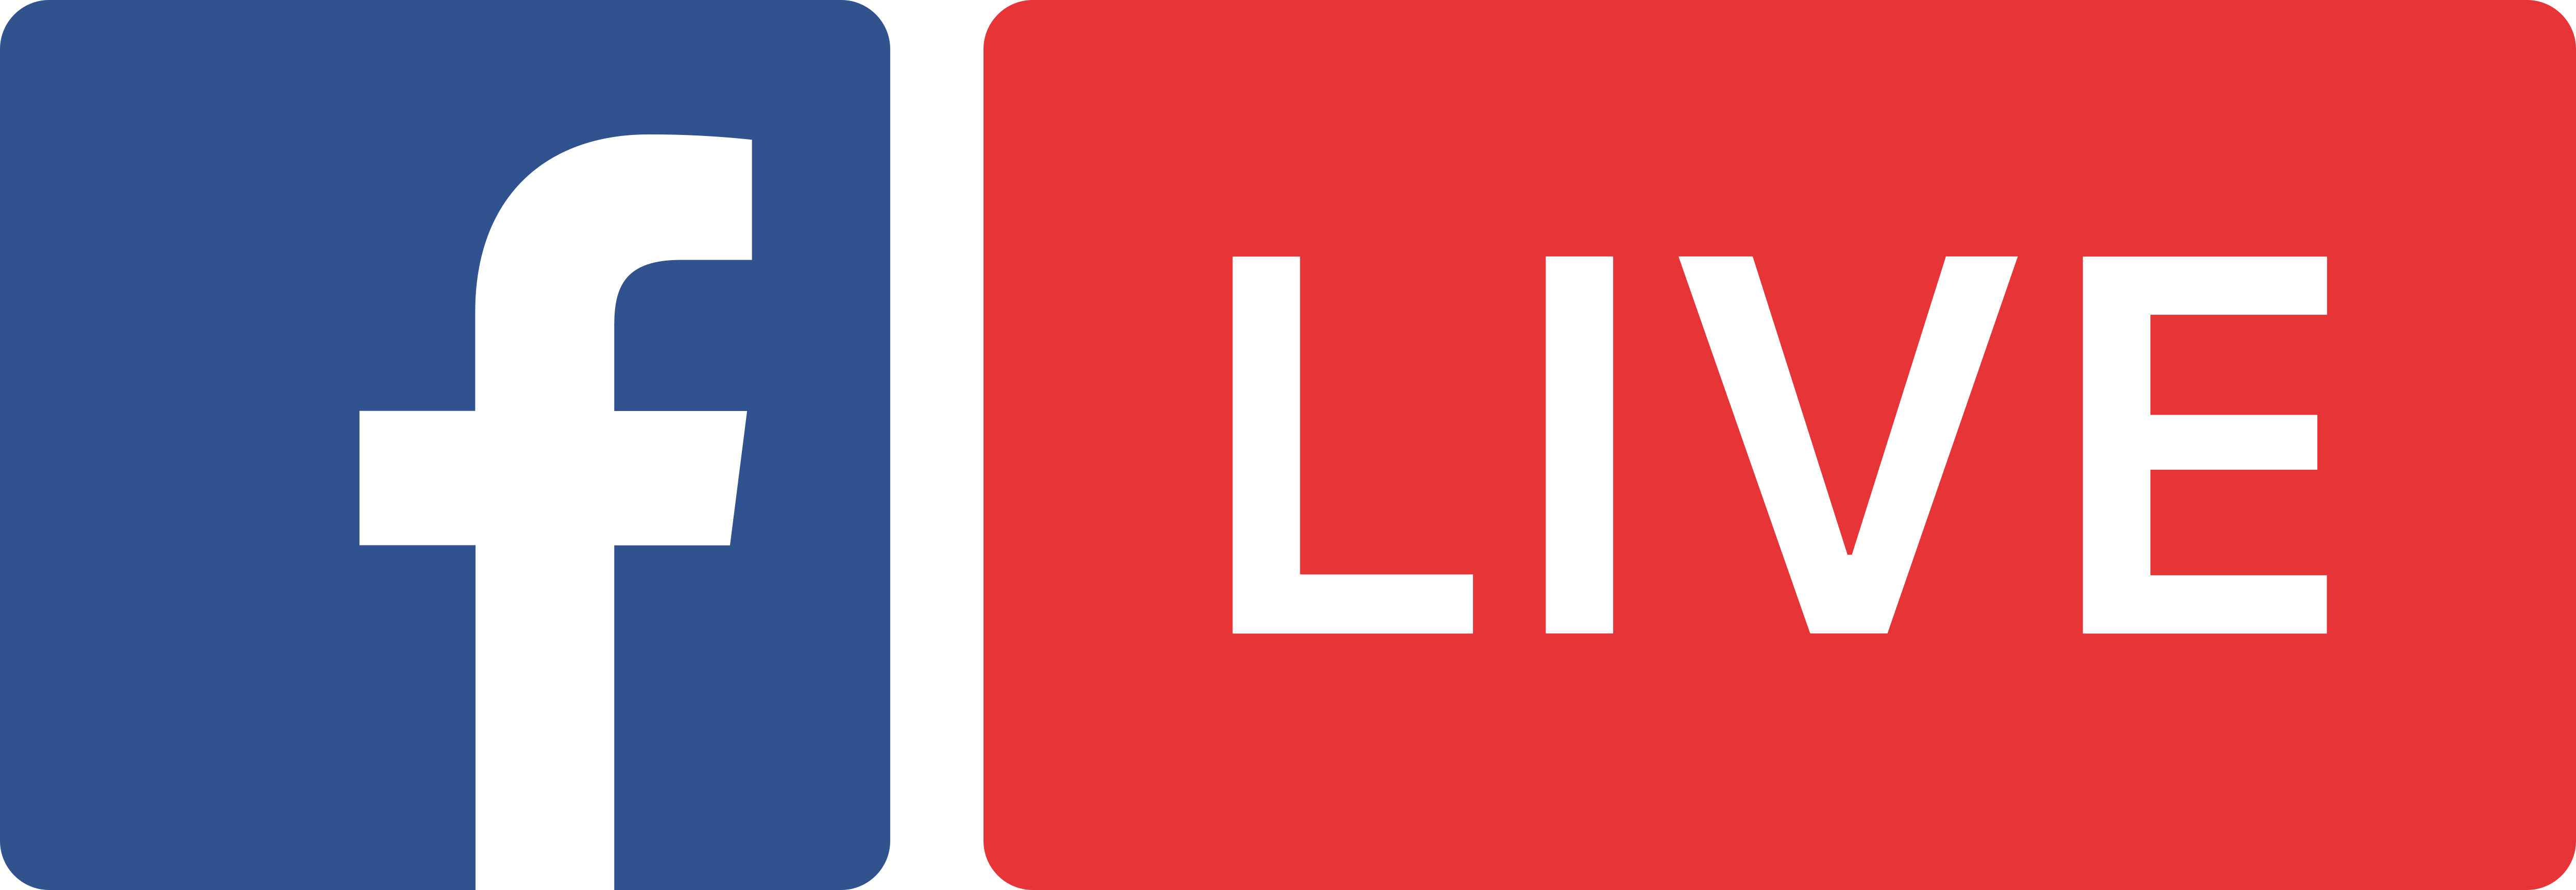 how to download fb live video